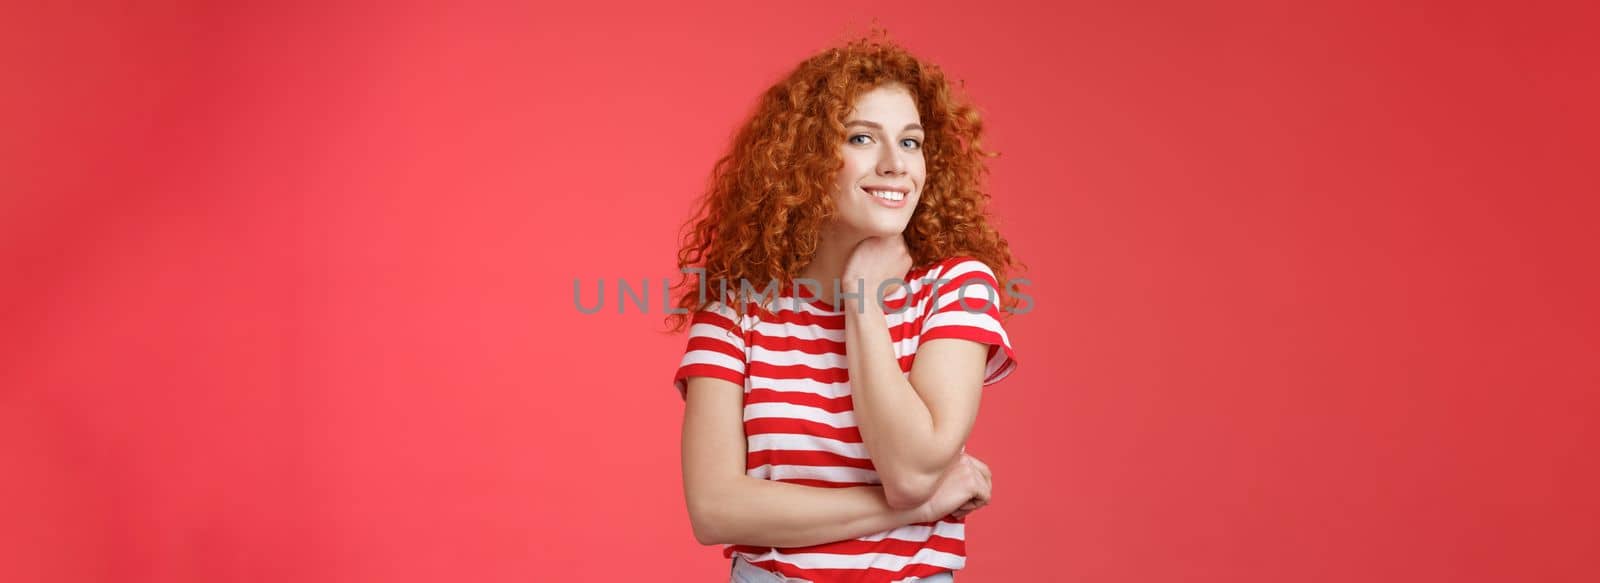 Lifestyle. Cheerful lively cute tender redhead curly girl romantic summer mood pondering what present girlfriend happy pride month silly smiling touch face-line look curious camera red background.